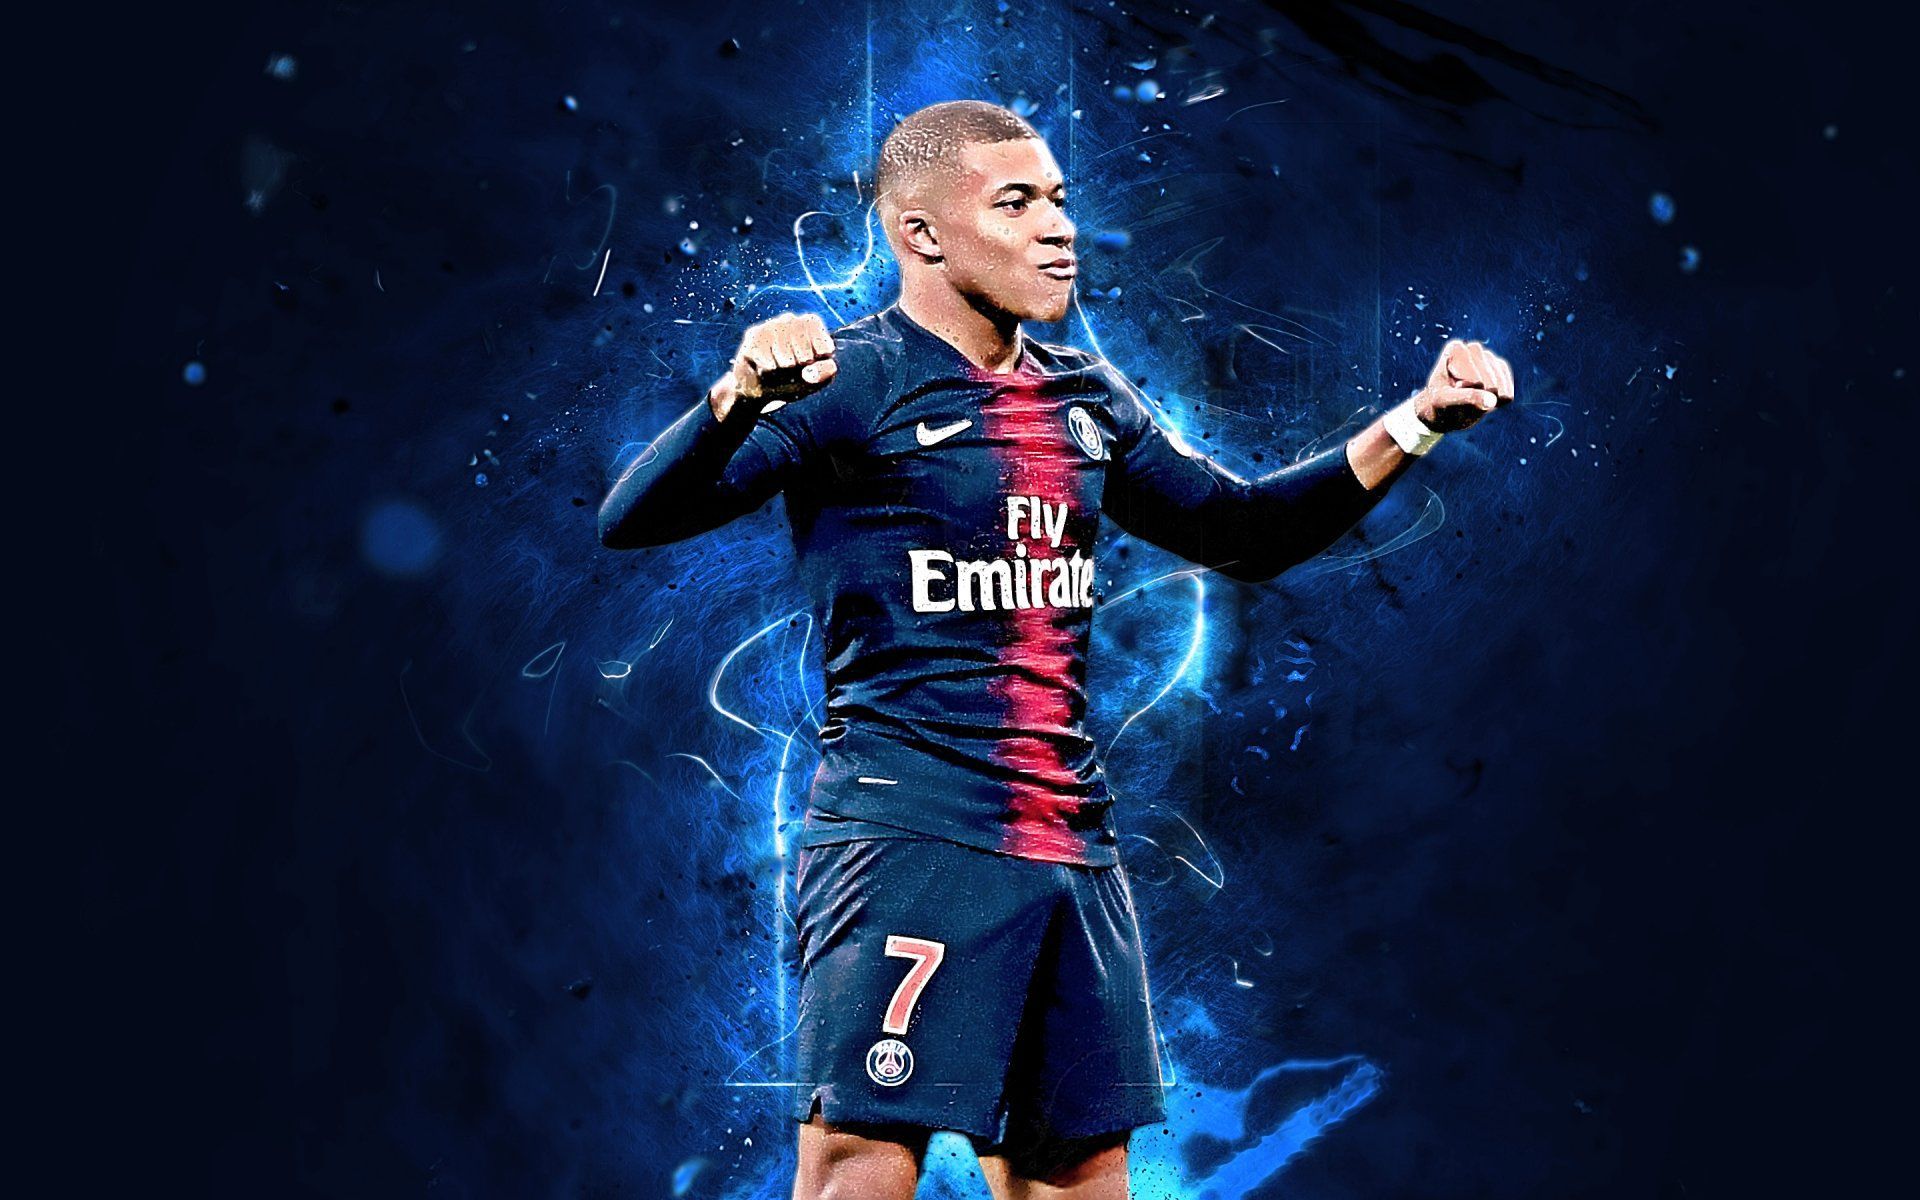 High Quality Mbappe Wallpapers On Wallpaperdog